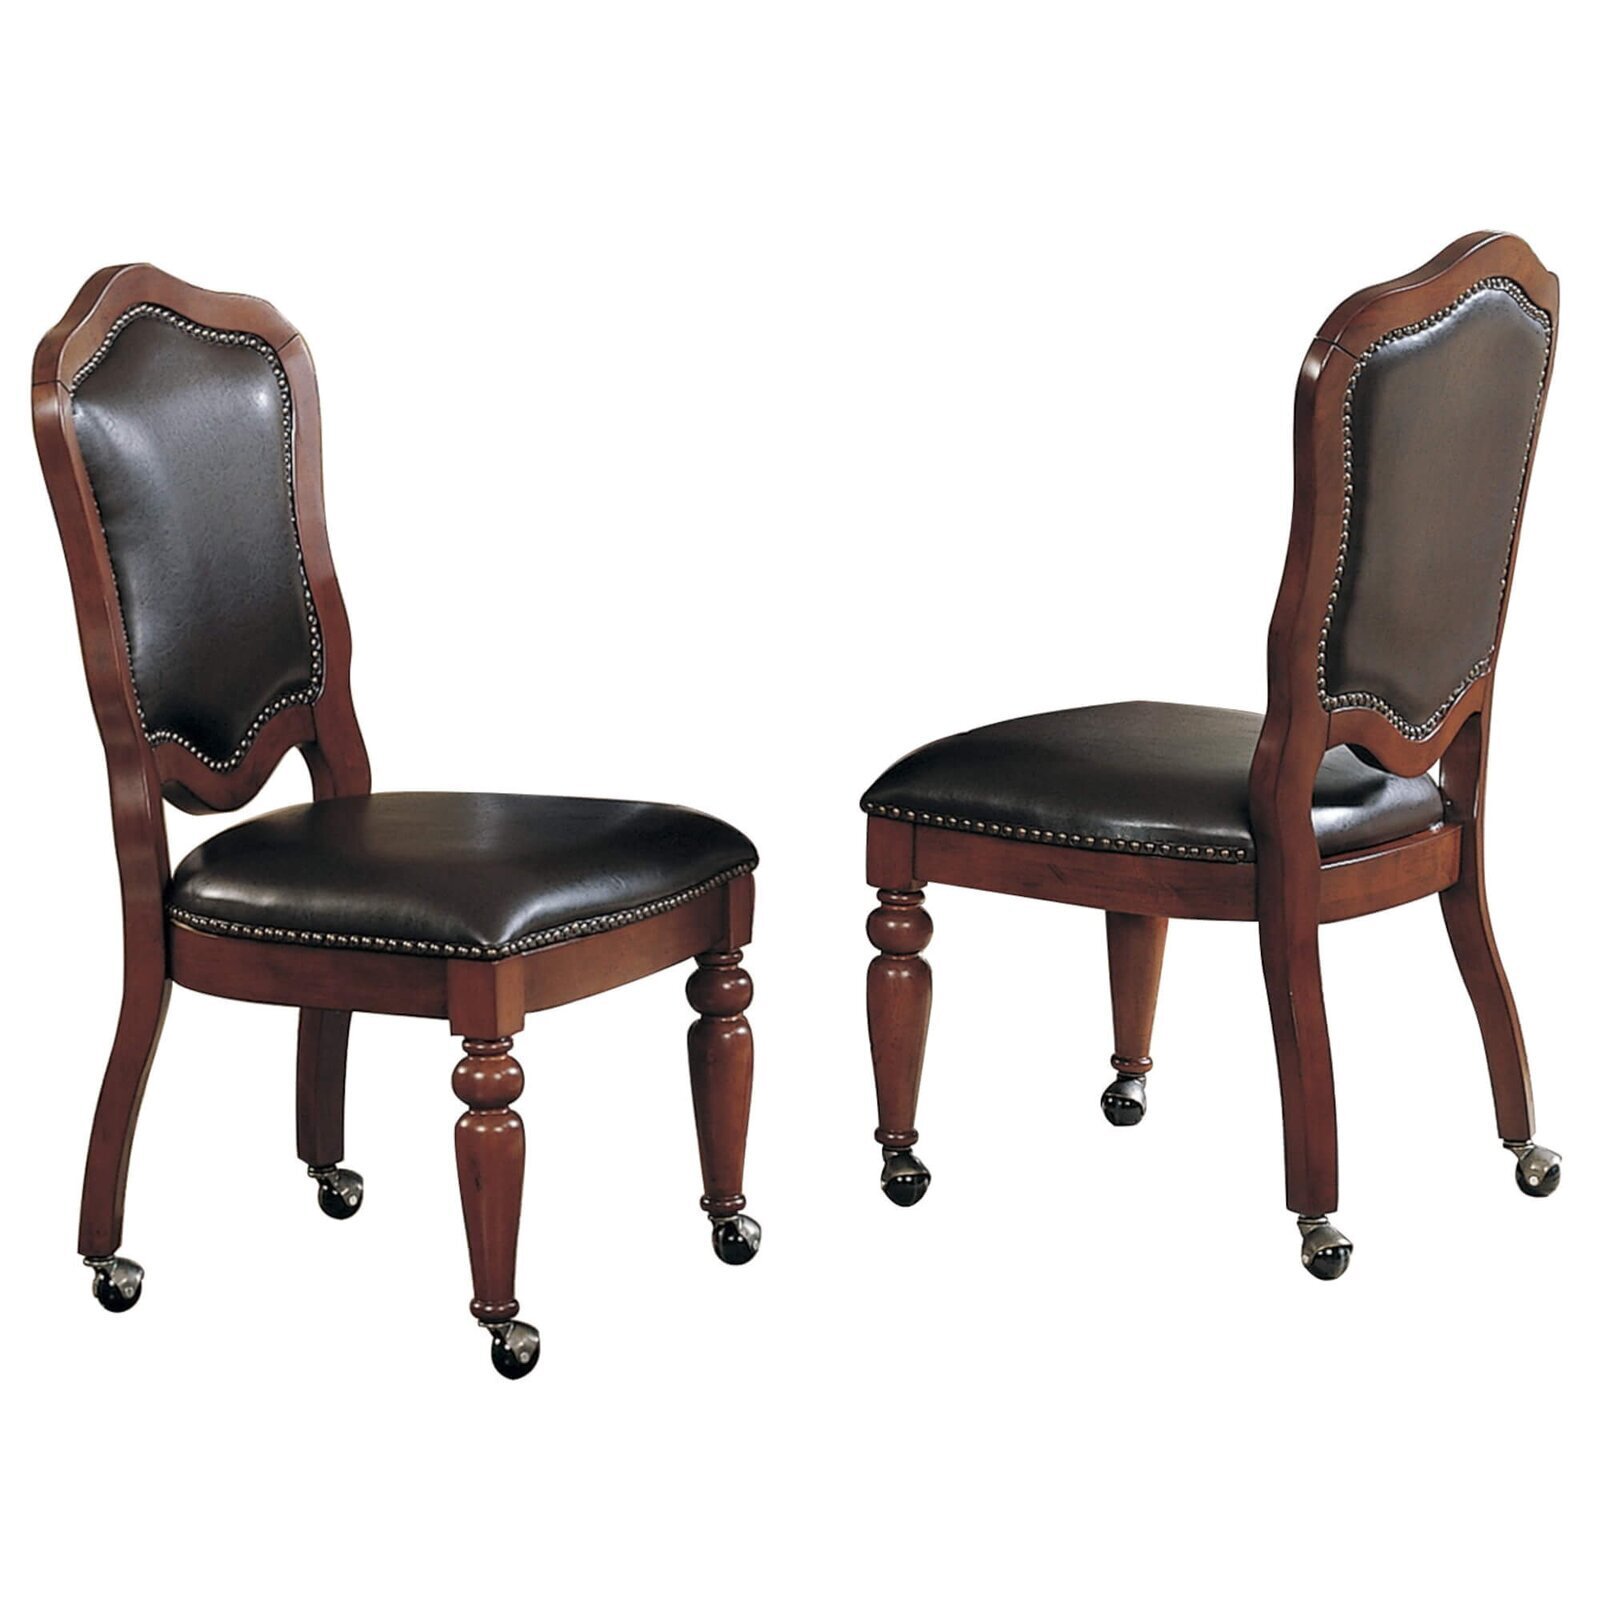 Set of Two Wood Poker Chairs